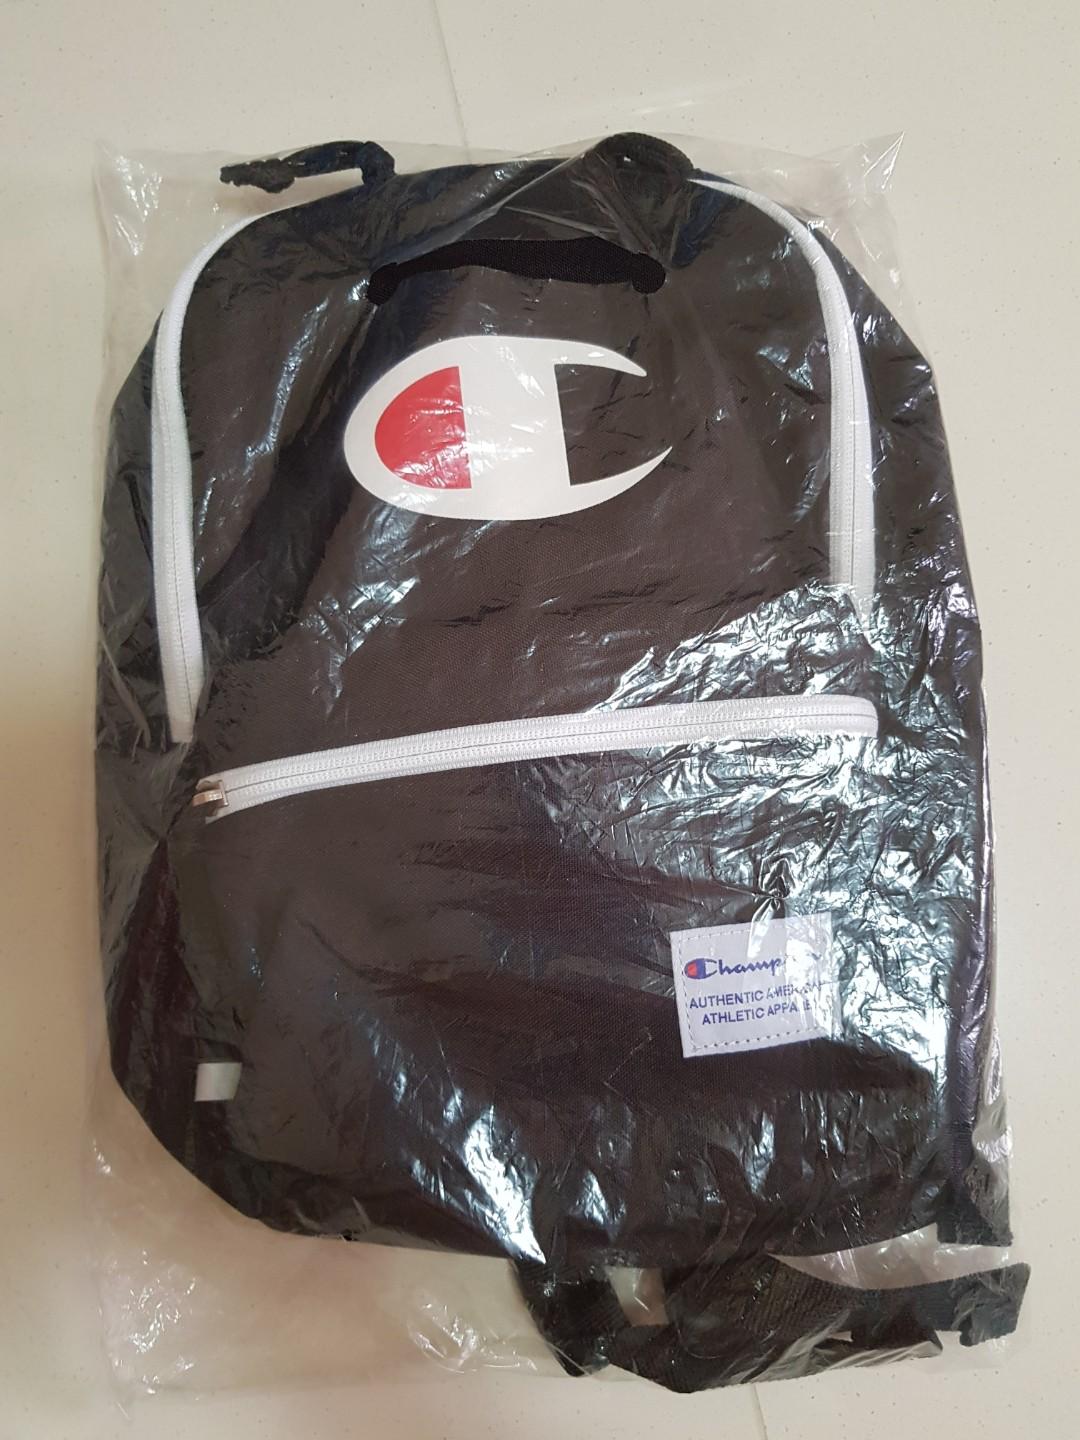 champion backpack for kids